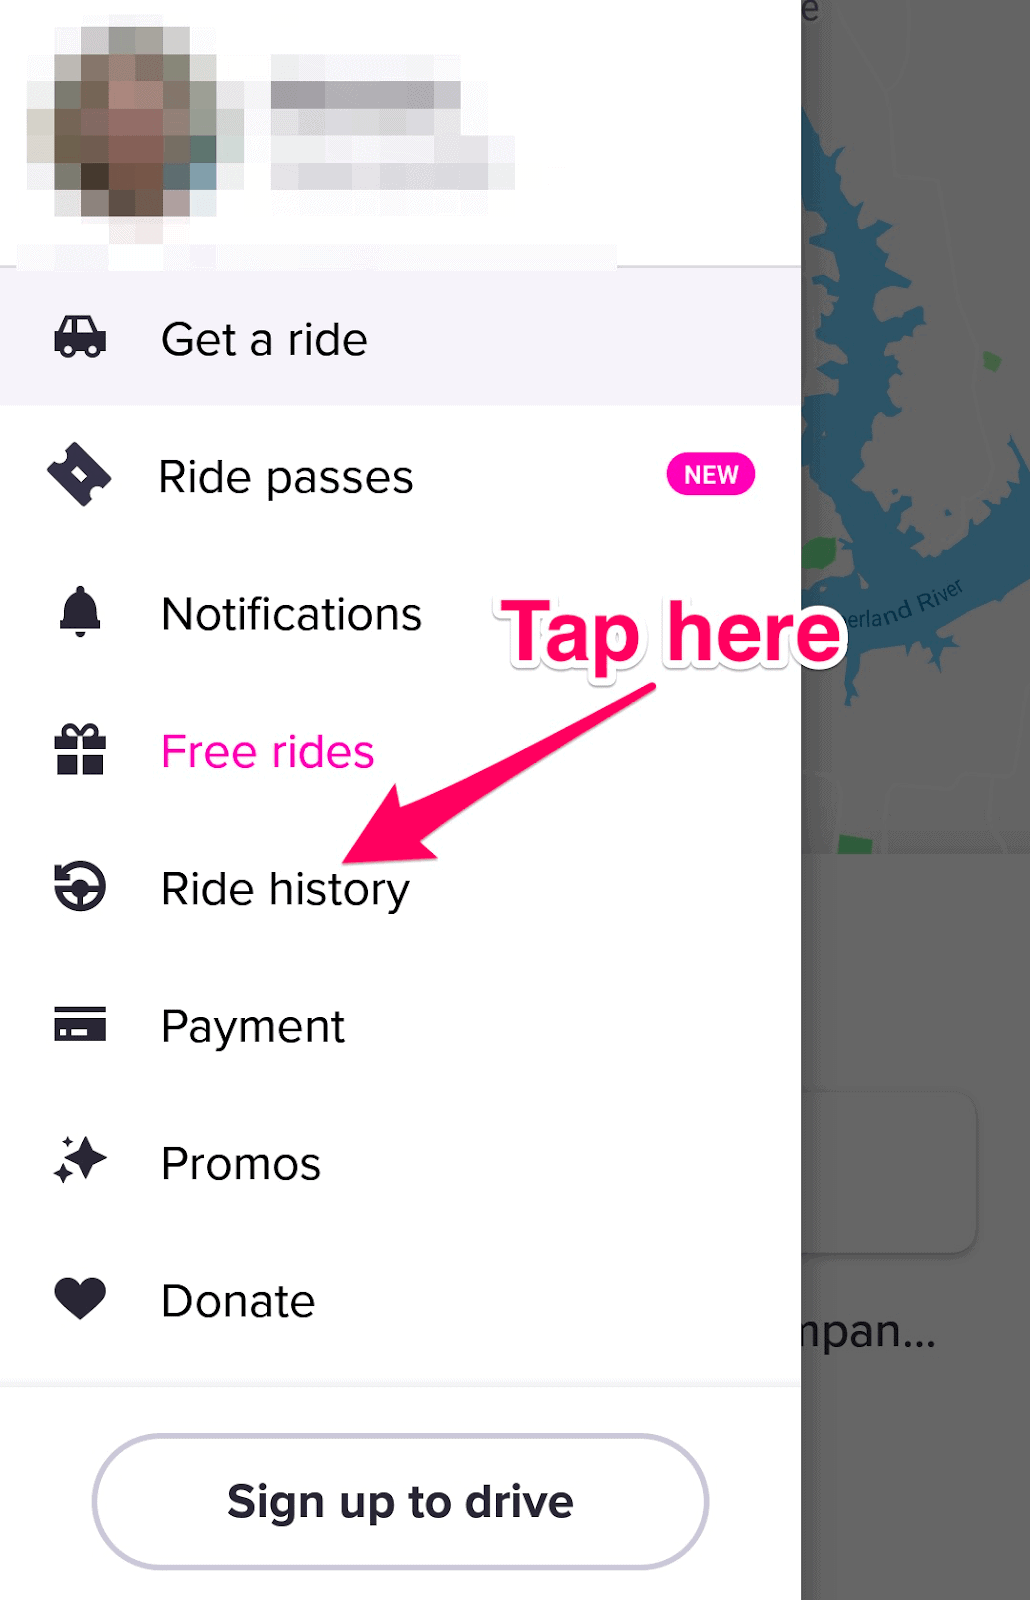 How to Report Uber and Lyft Drivers and Dispute Uber and Lyft Charges: Ride history